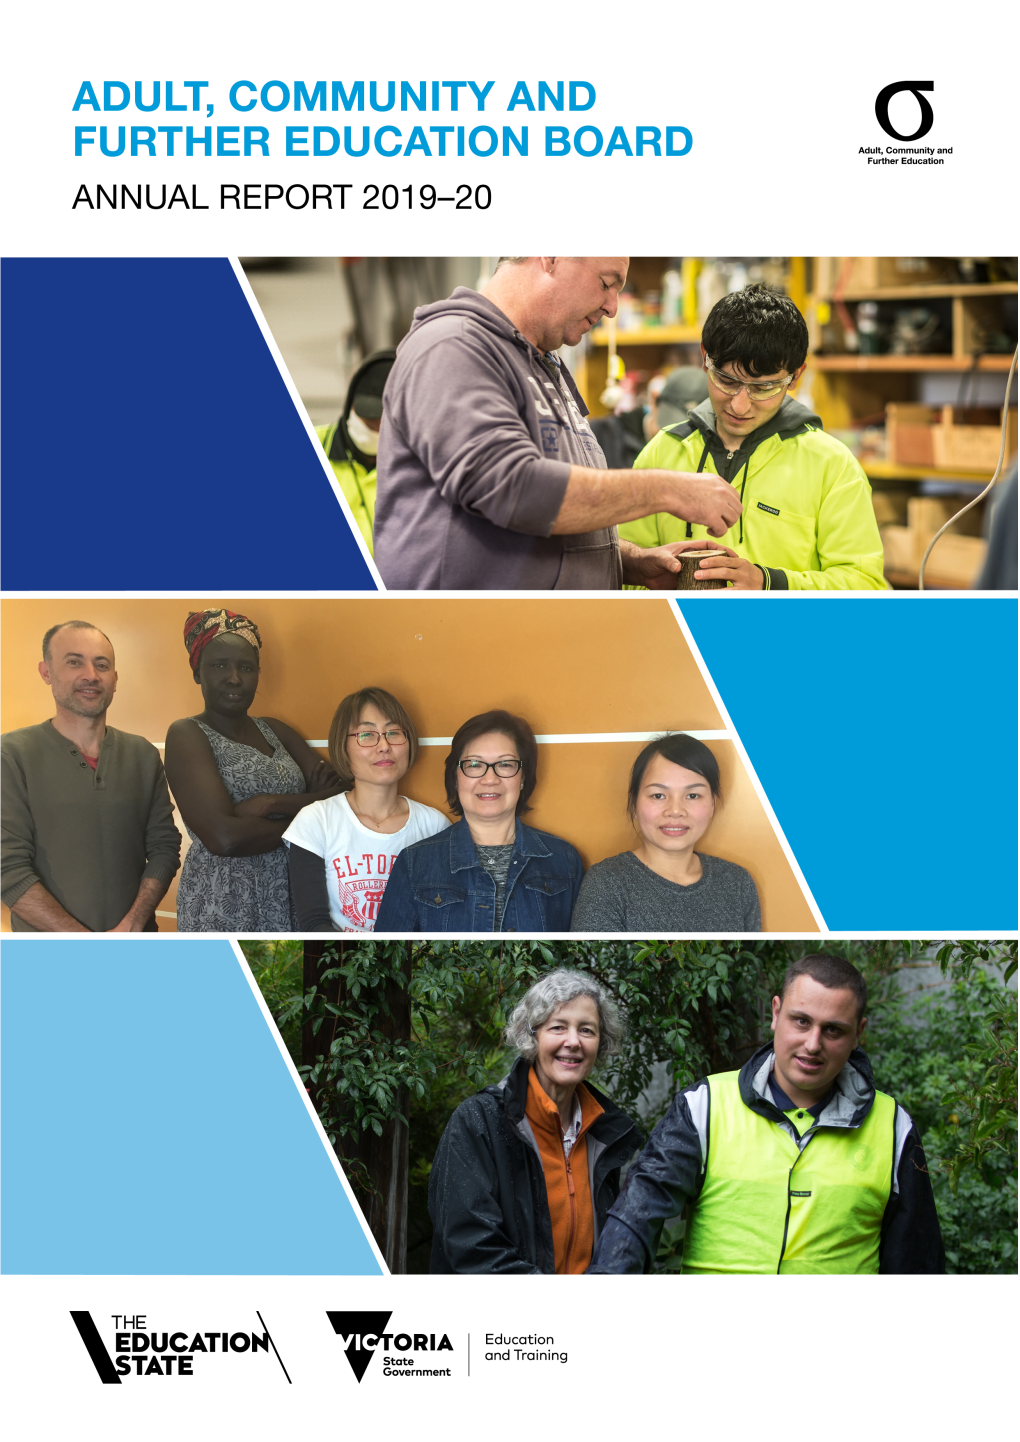 Adult, Community and Further Education Board Annual Report